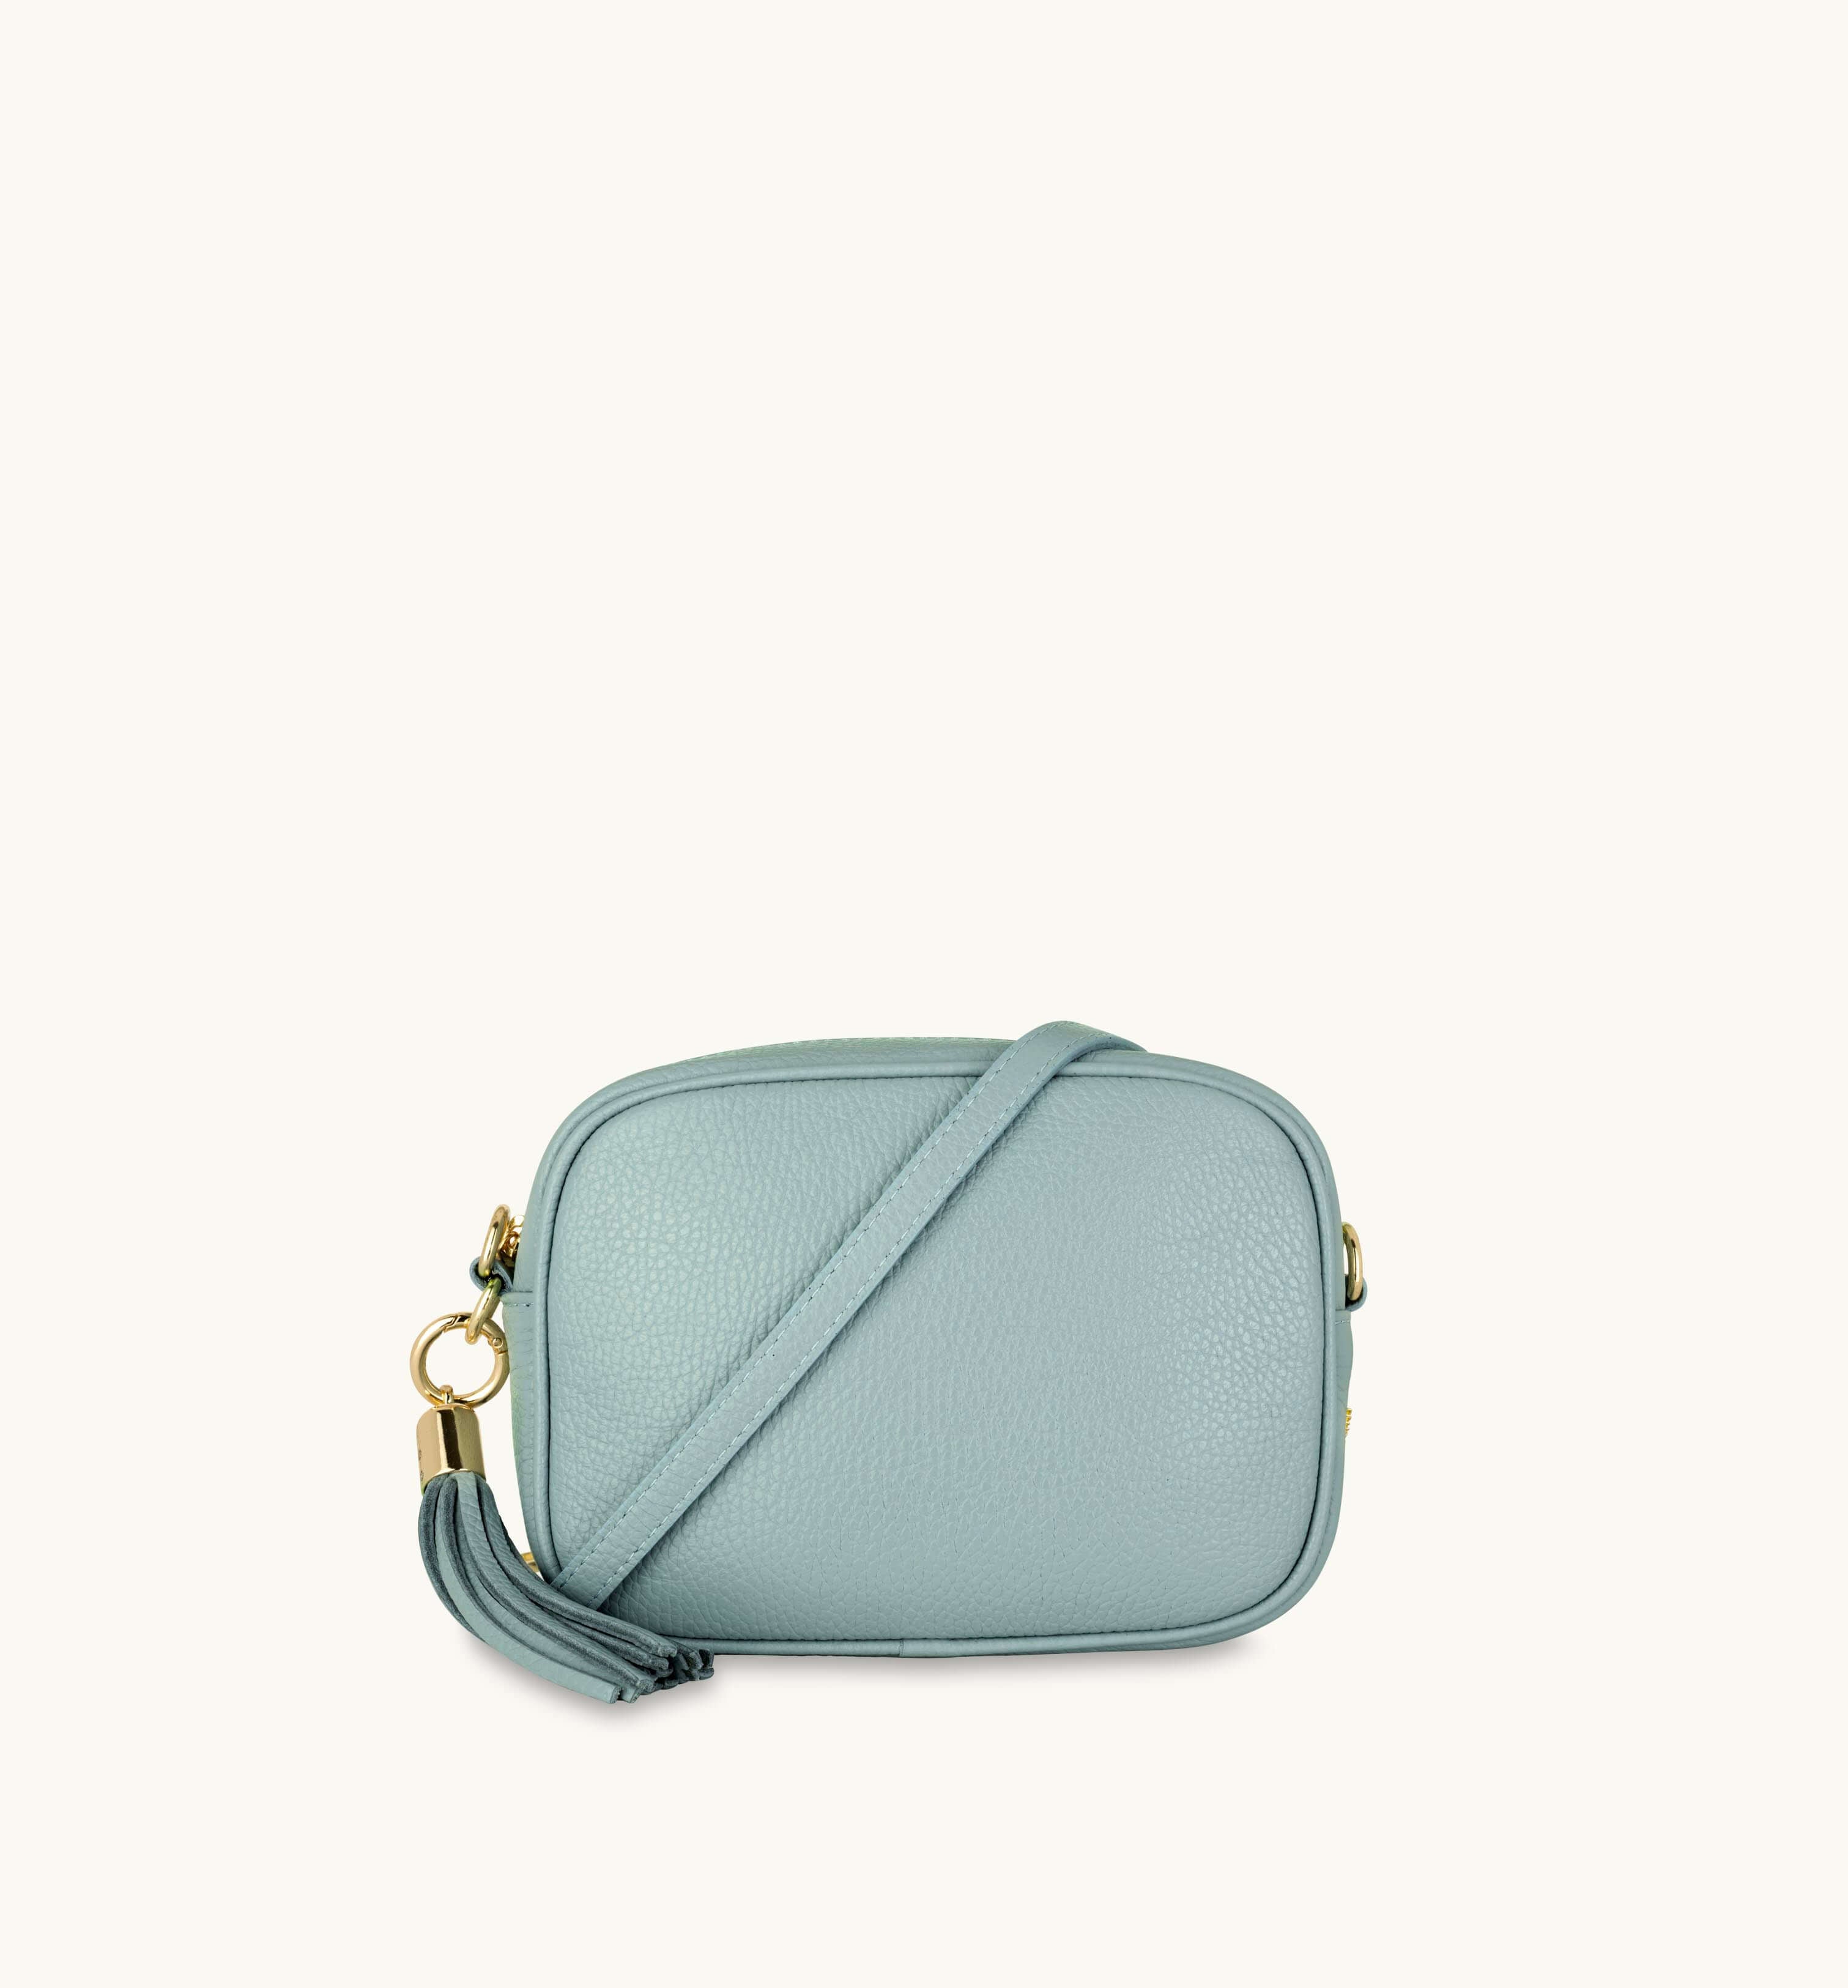 Pale Blue Leather Crossbody Bag With Gold Chain Strap – Apatchy London